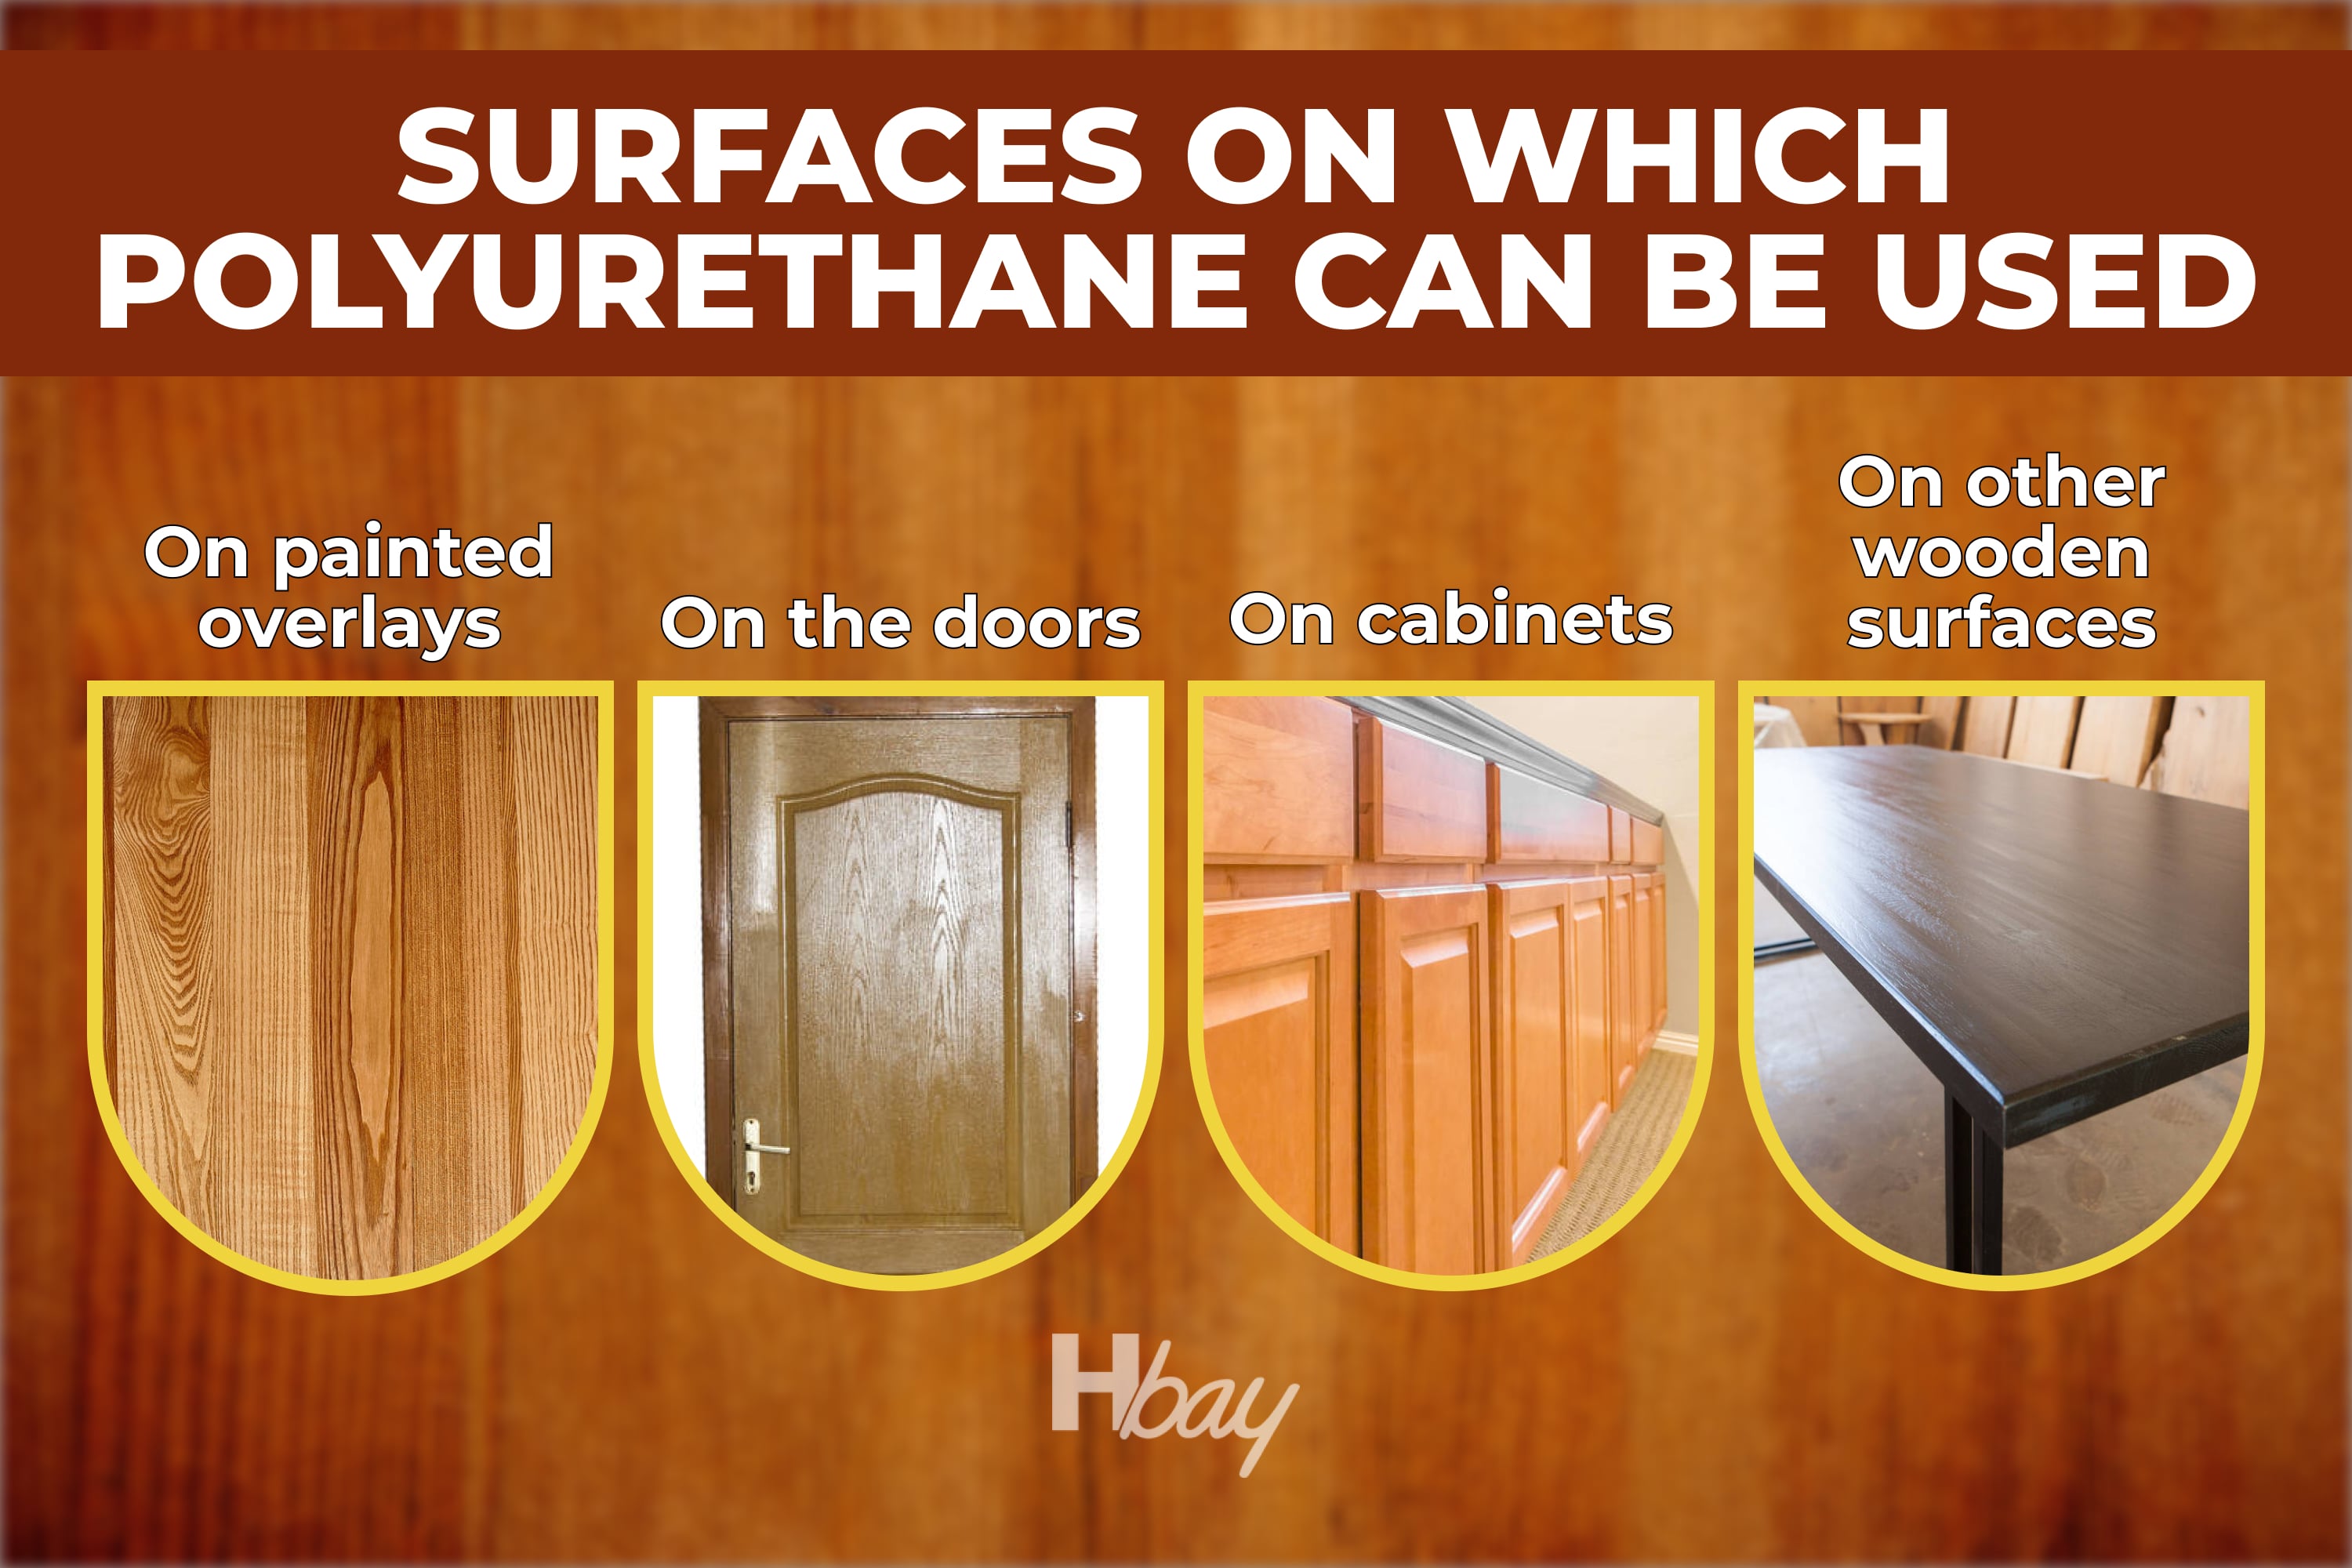 Surfaces on which polyurethane can be used